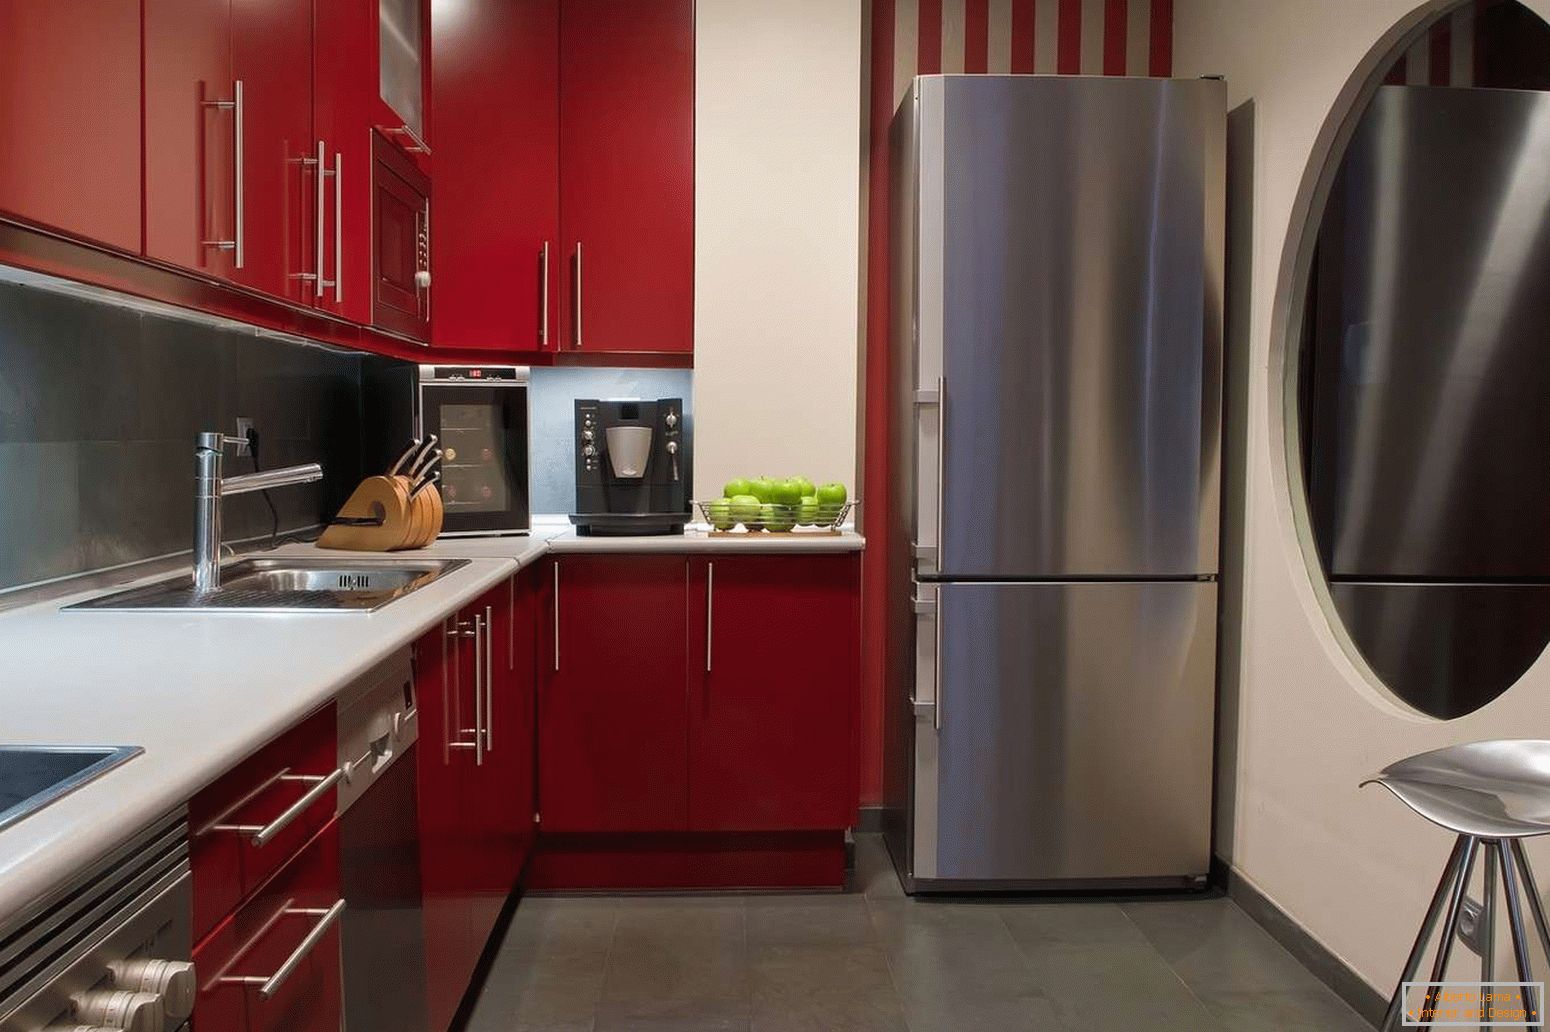 Gray floor in the kitchen with red furniture